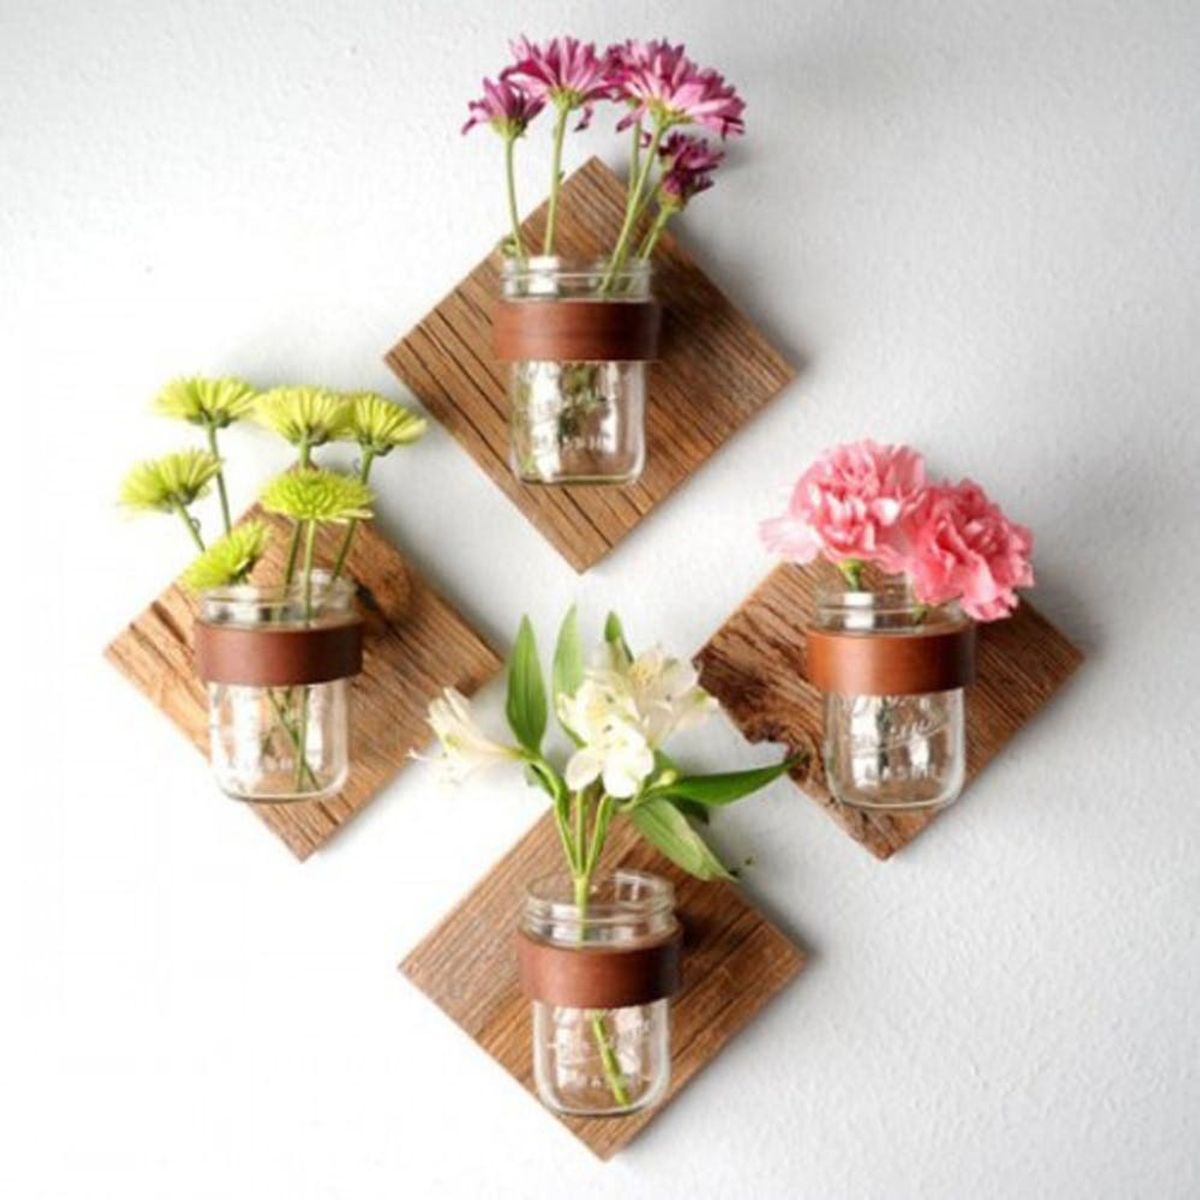 9 Mini Mason Jar Gardens to Help Bring Your Small Living Space to Life